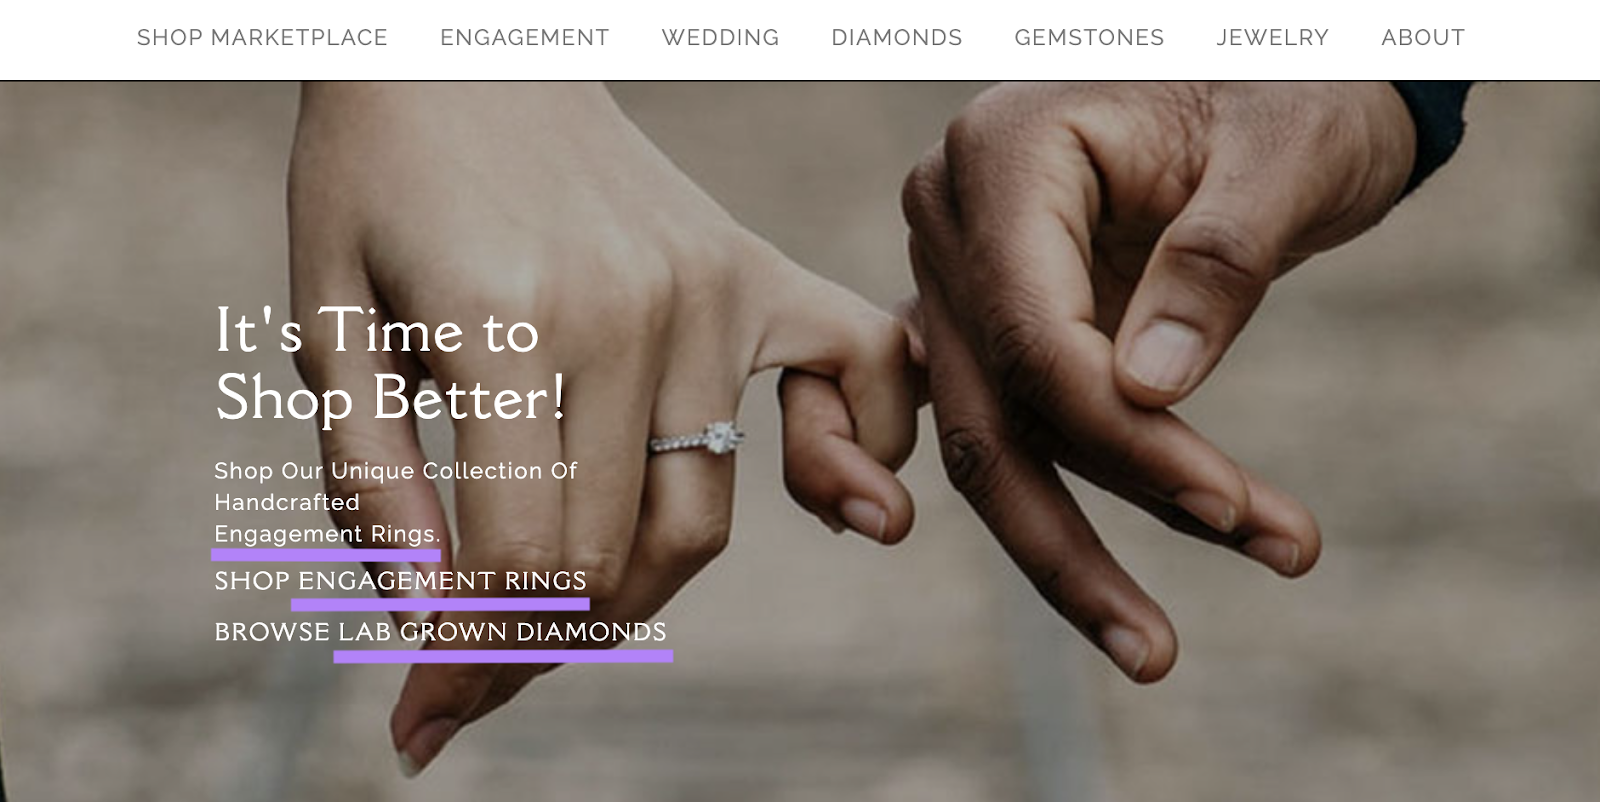 A webpage with text reading "Shop engagement rings" and "Browse lab grown diamonds"